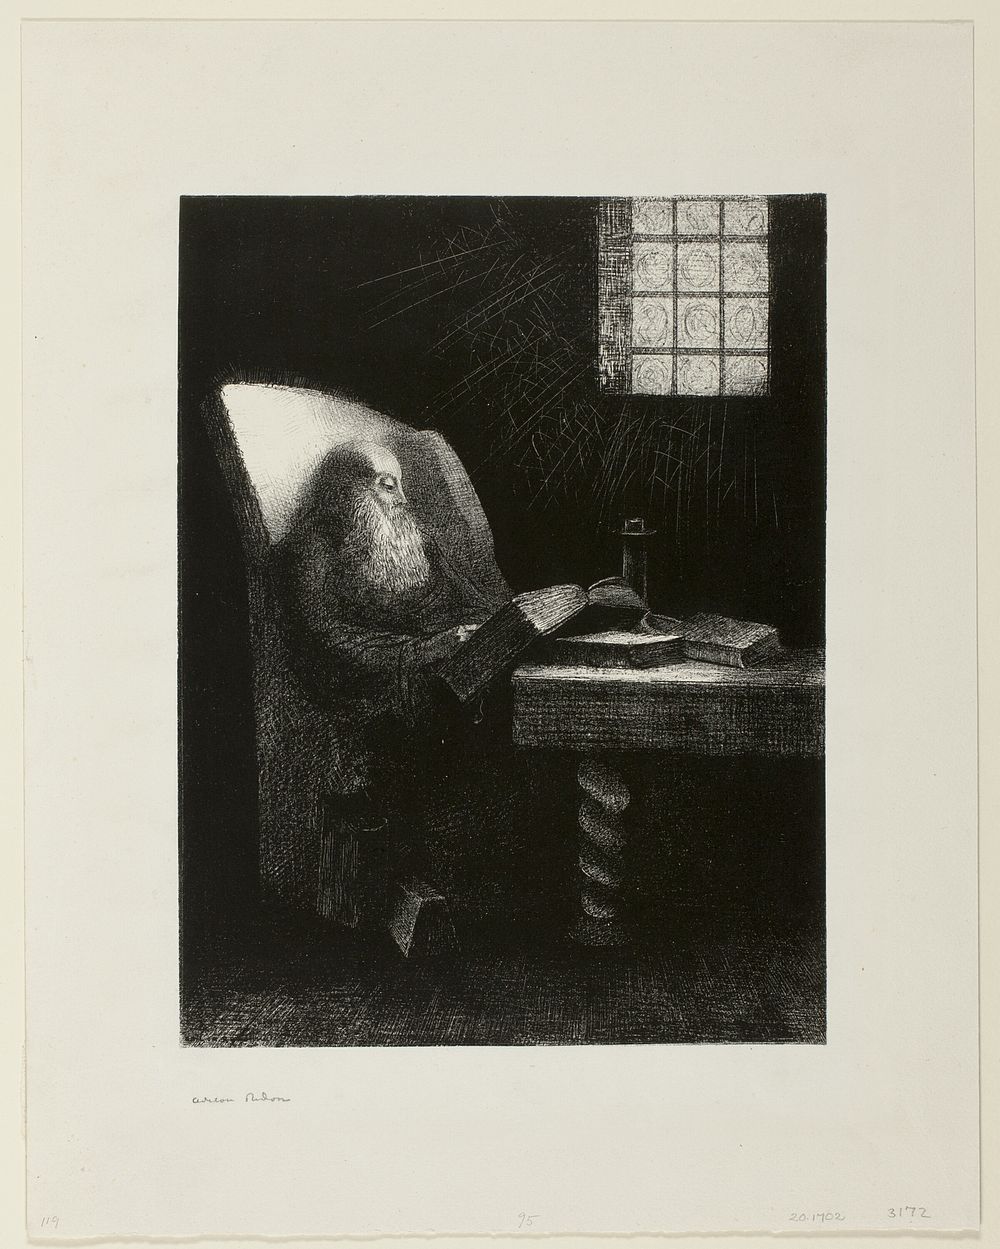 The Reader by Odilon Redon